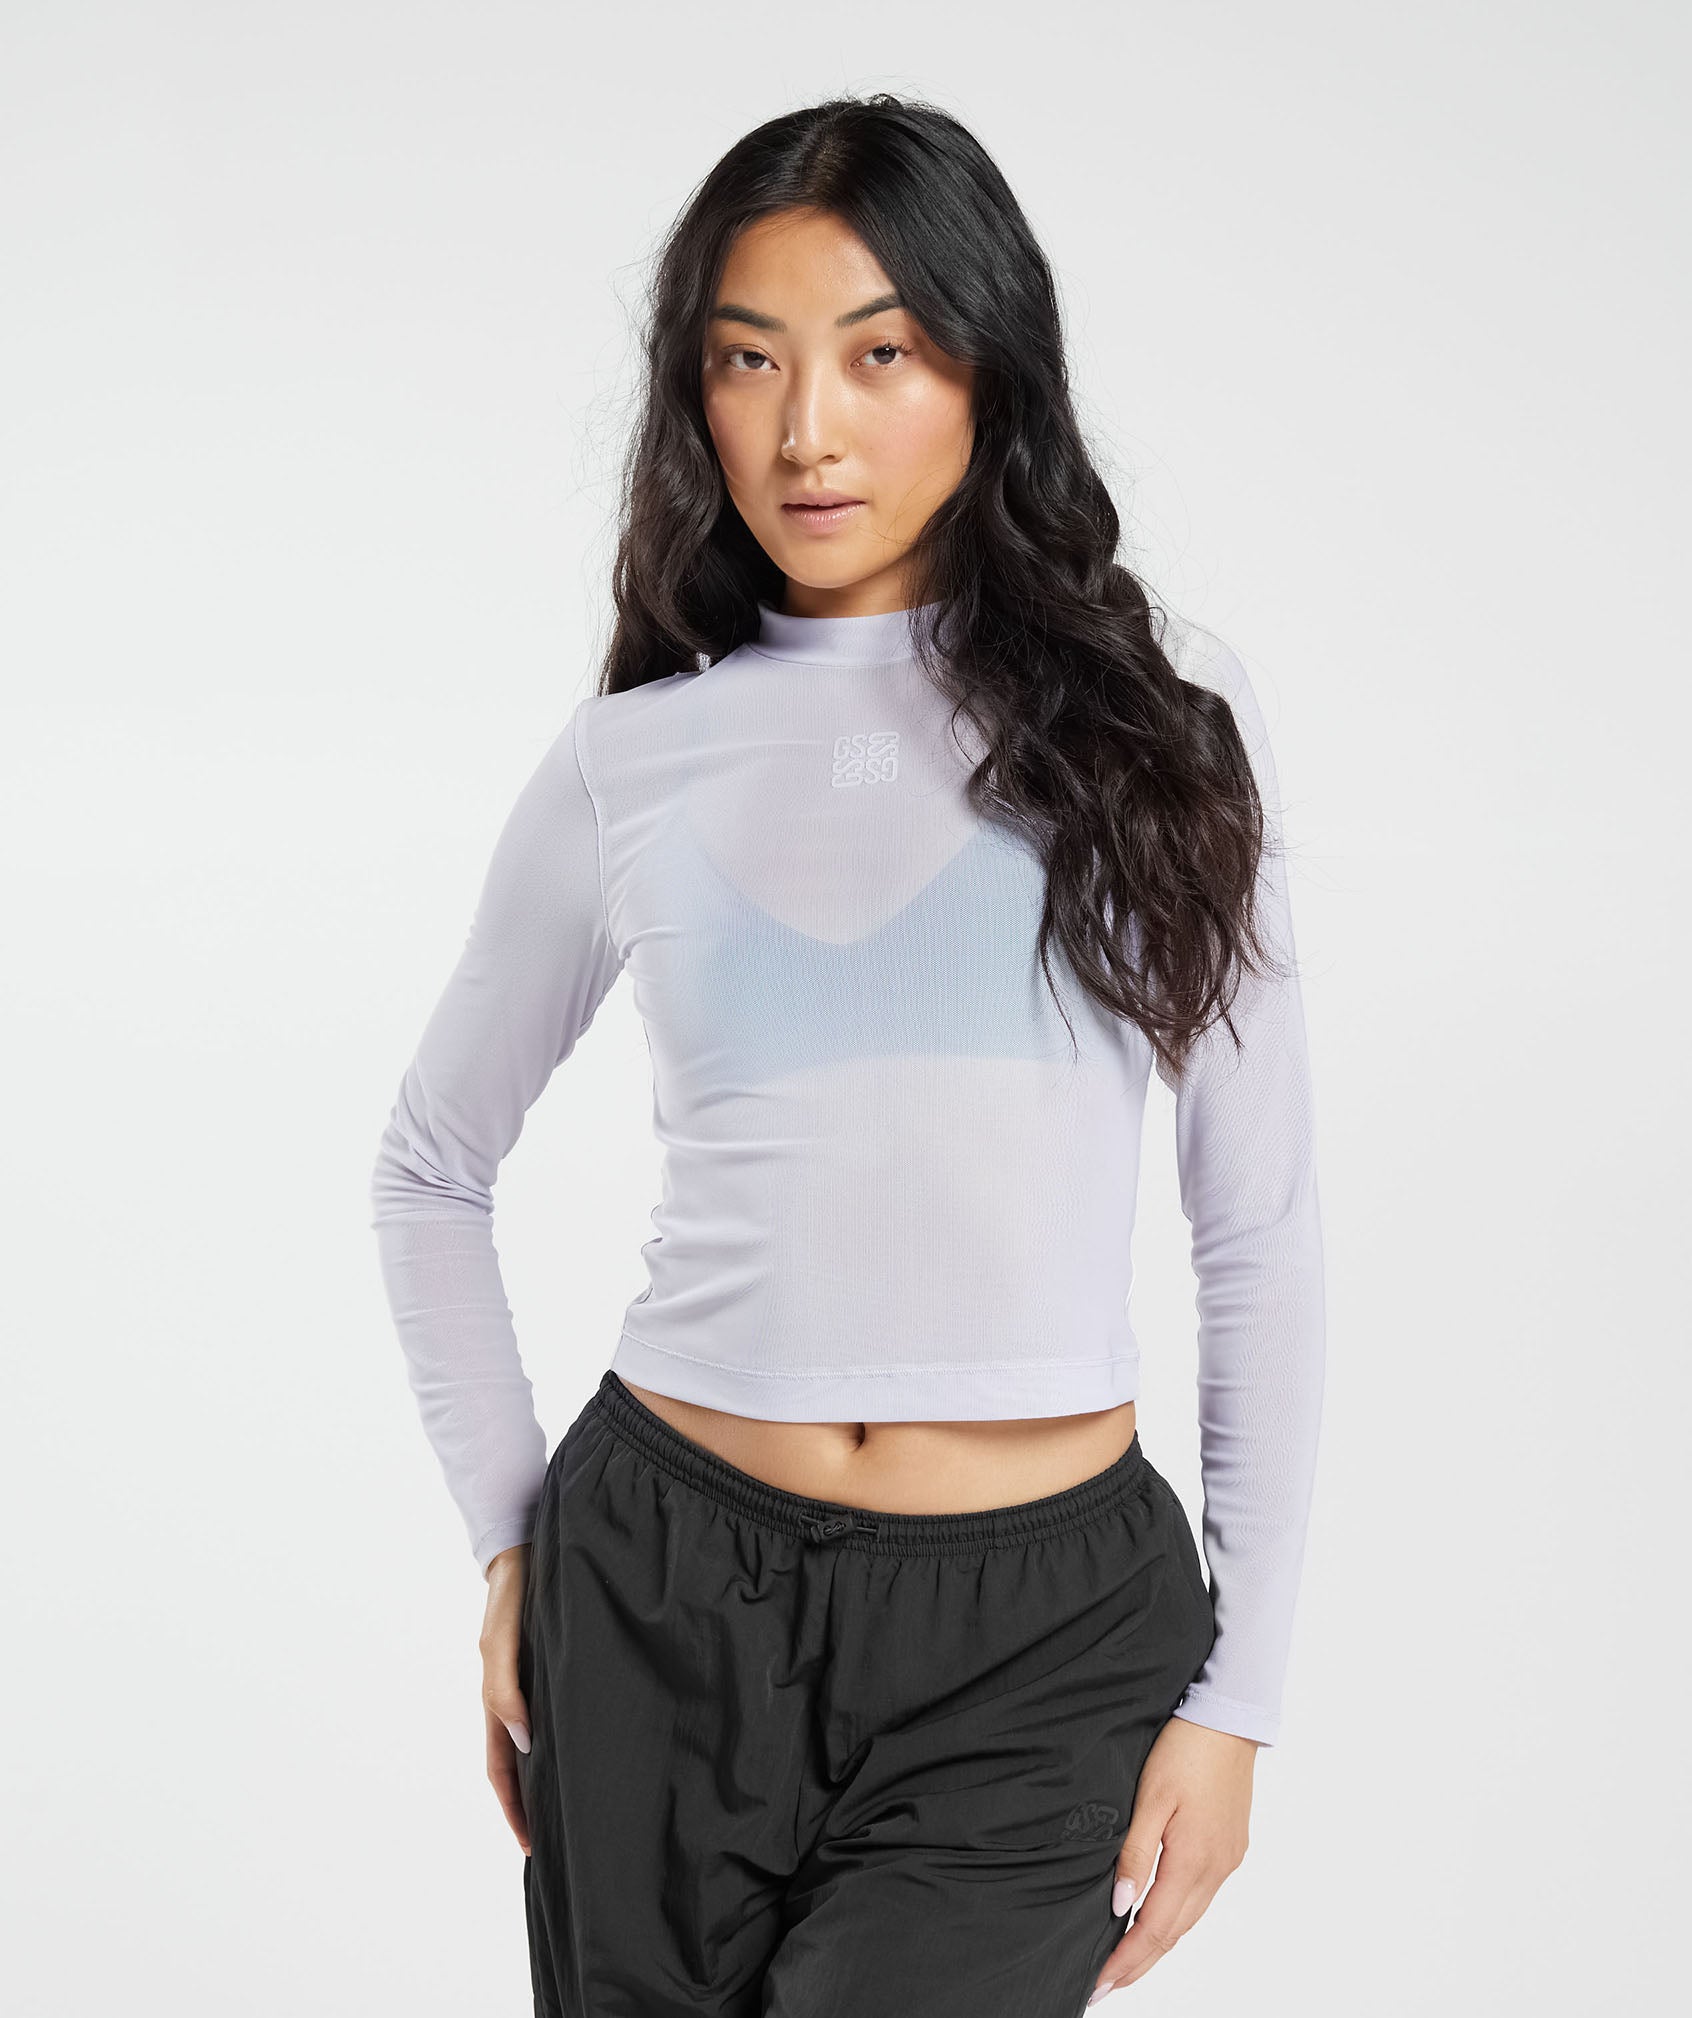 Monogram Mesh Long Sleeve Top in {{variantColor} is out of stock